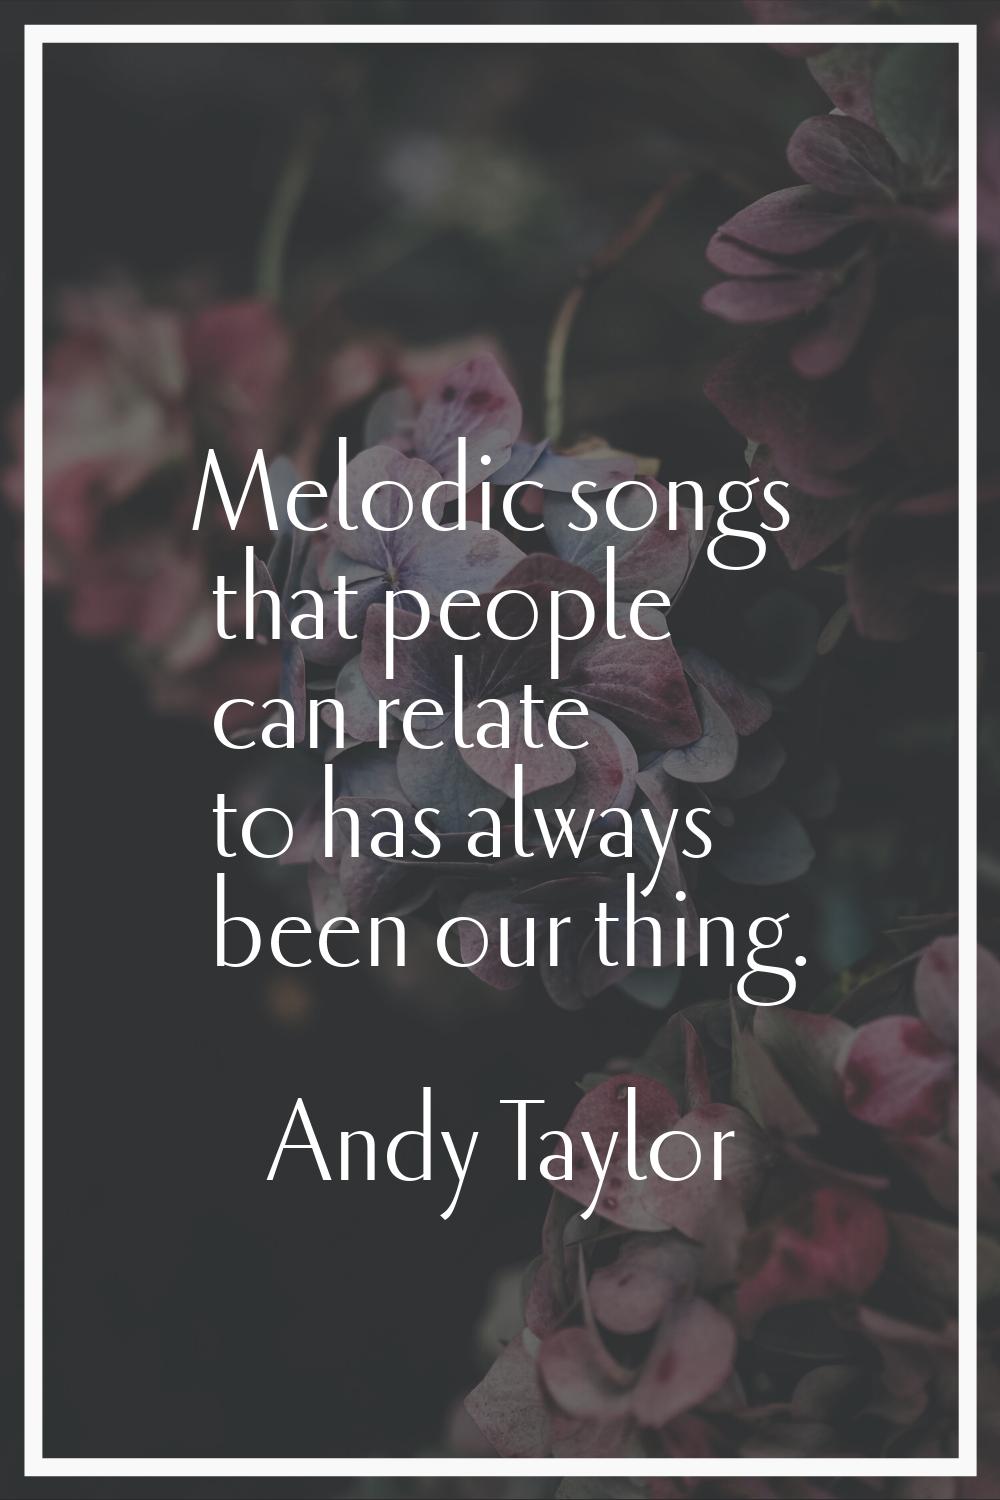 Melodic songs that people can relate to has always been our thing.